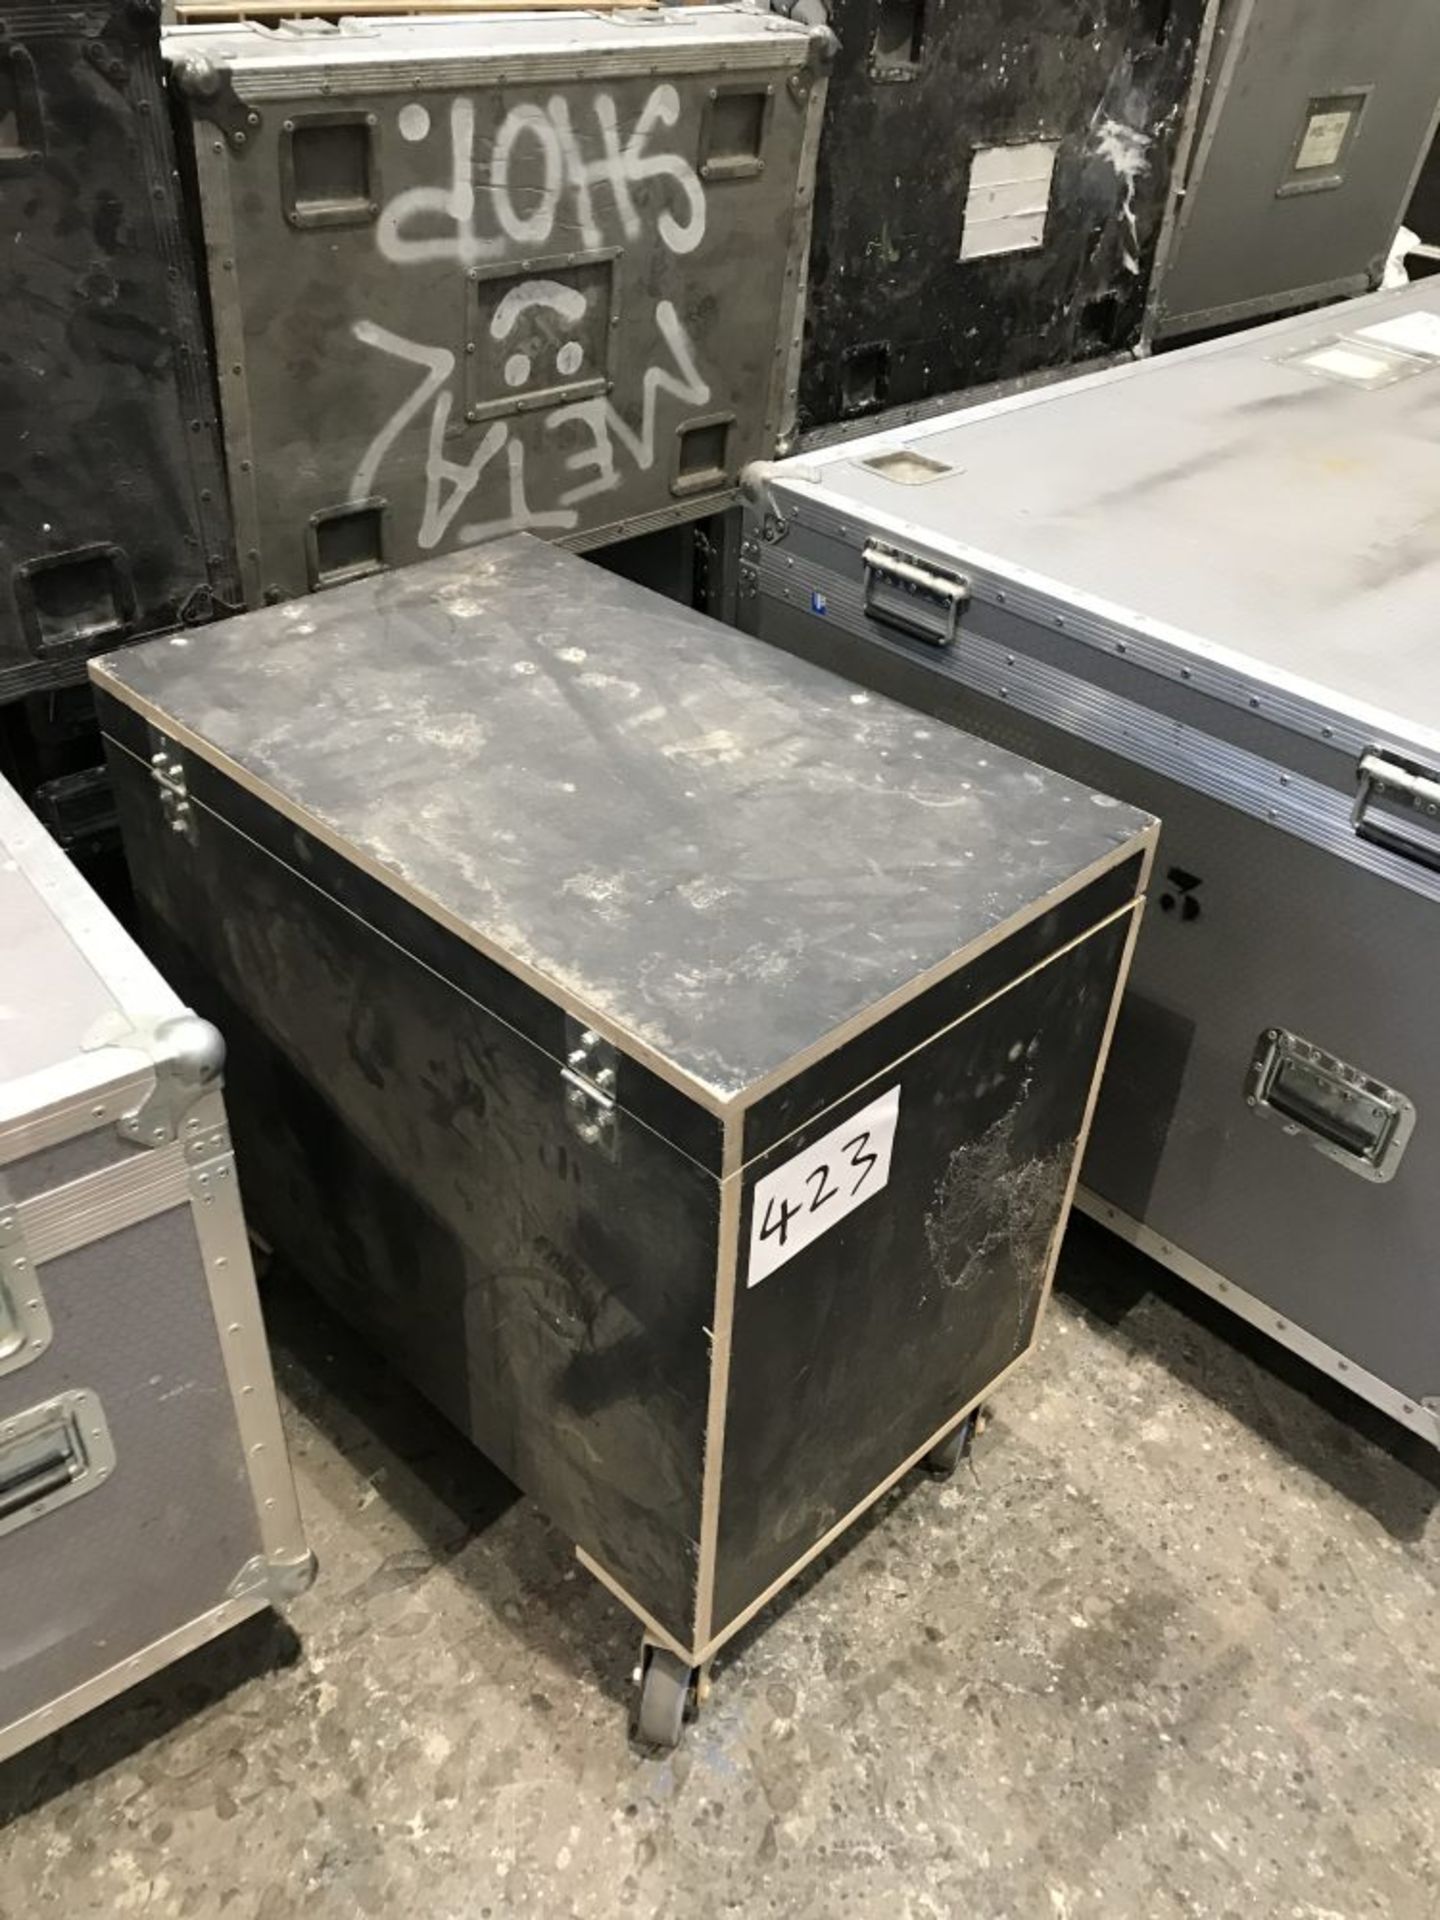 7 site storage flight cases on casters and 2 ply cabinets on casters with contents if any - Image 7 of 10